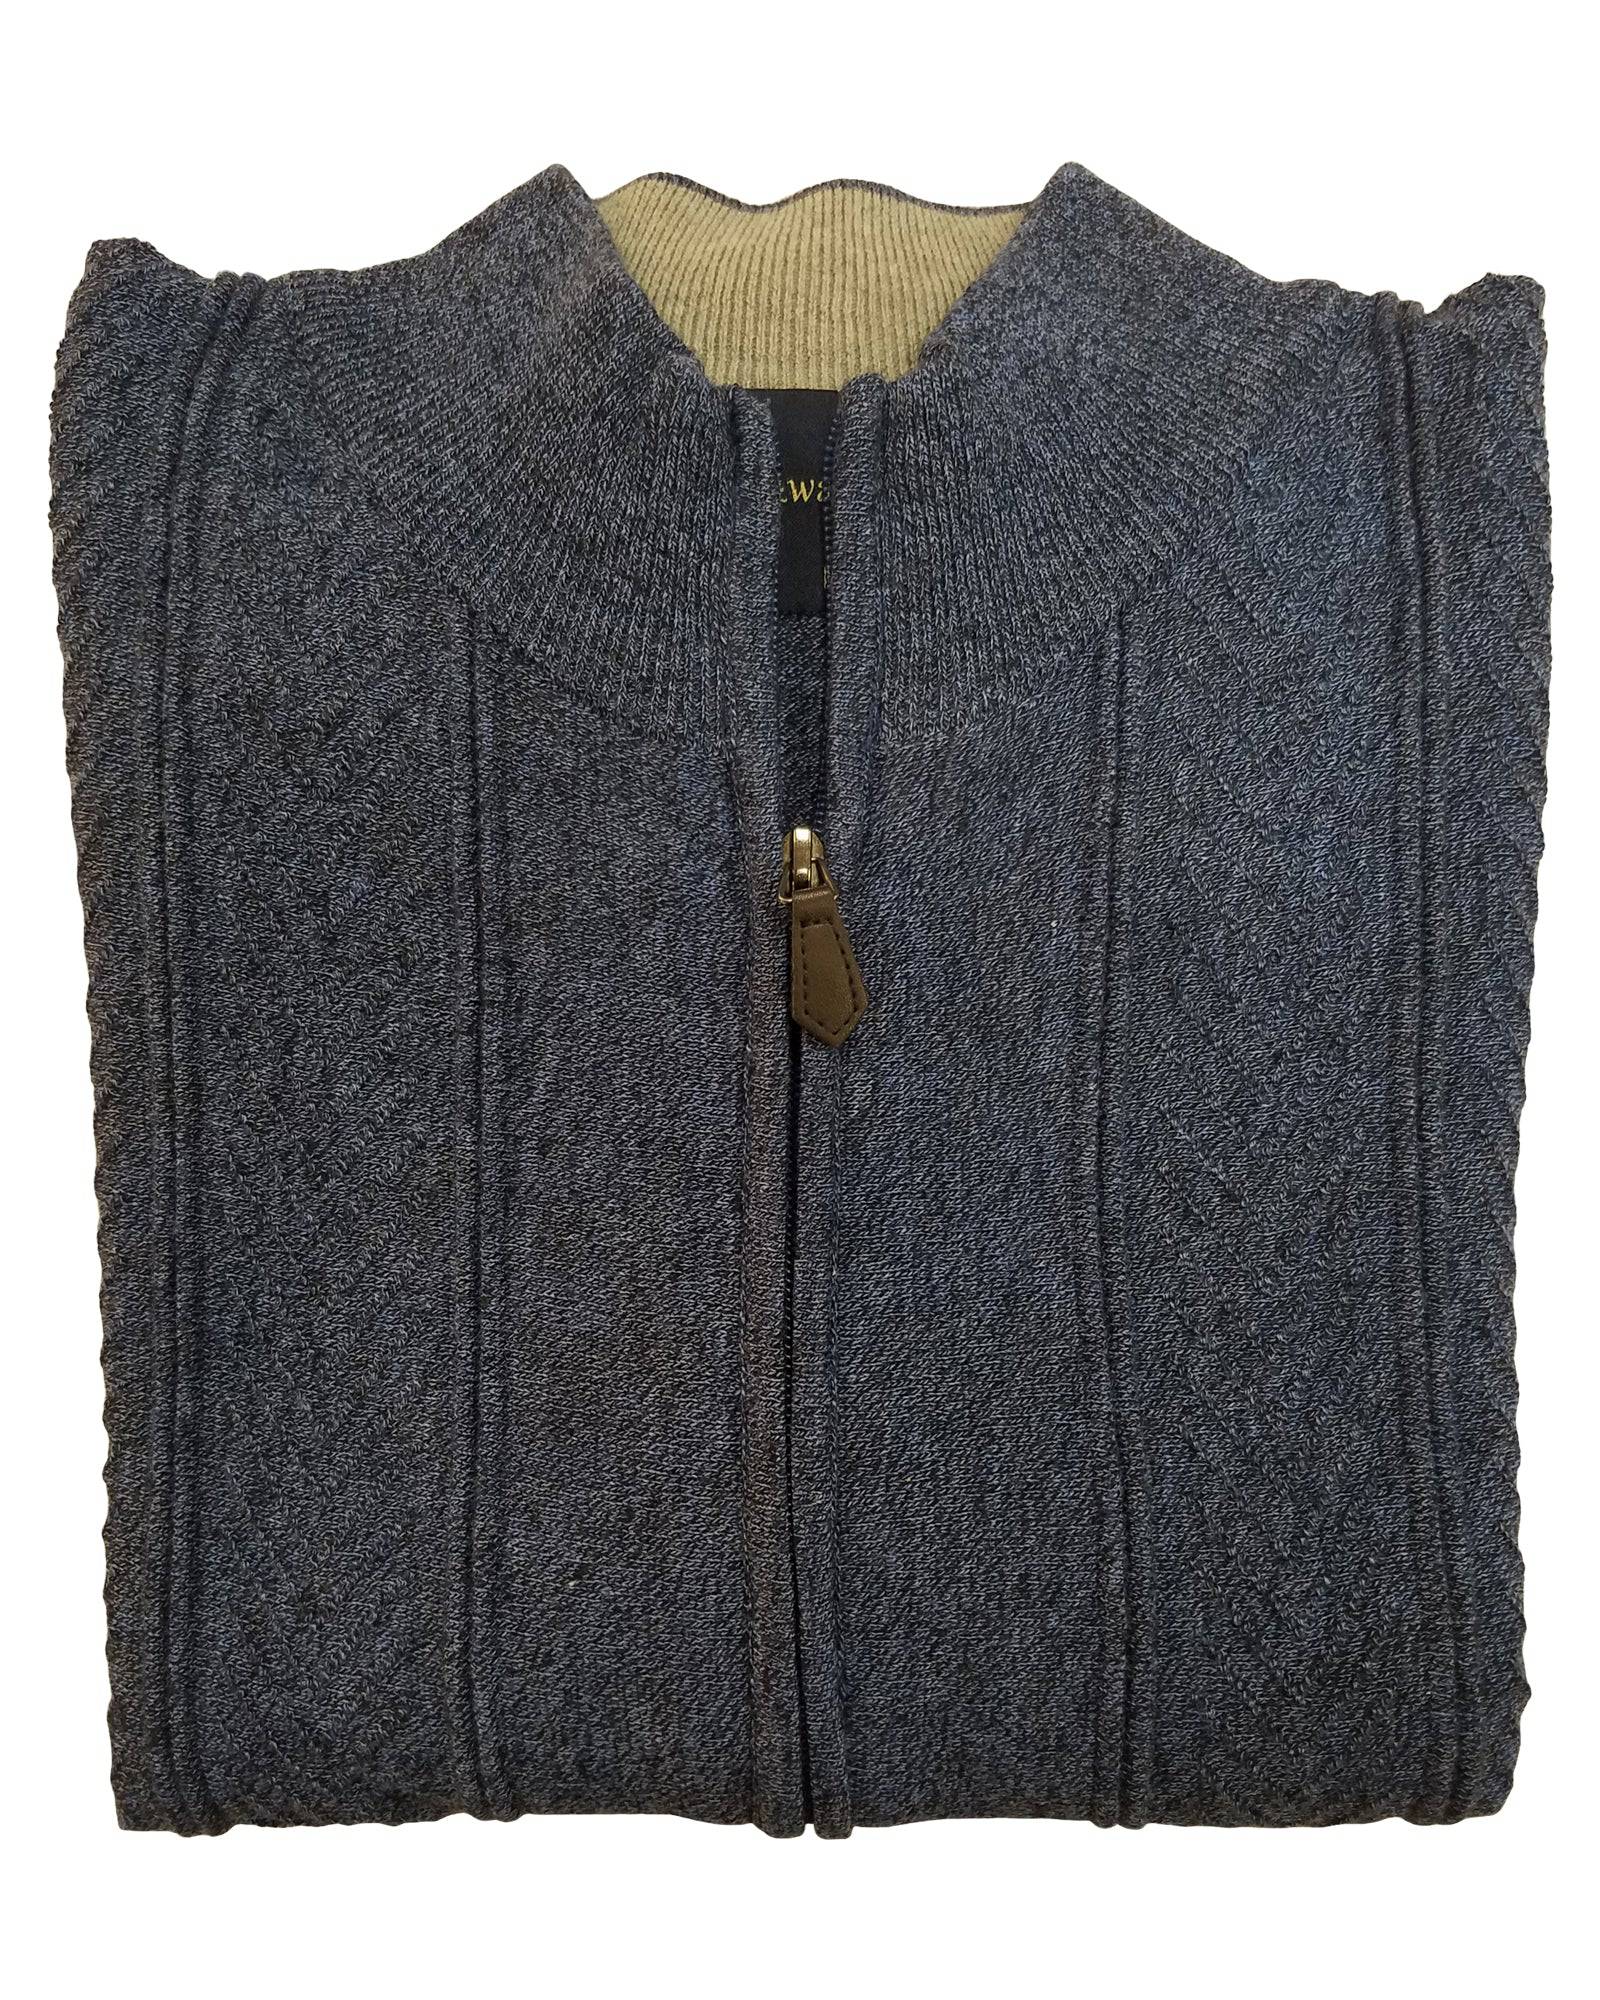 Zip Front Cardigan Sweater In Blue Heater Cotton Blend - Rainwater's Men's Clothing and Tuxedo Rental